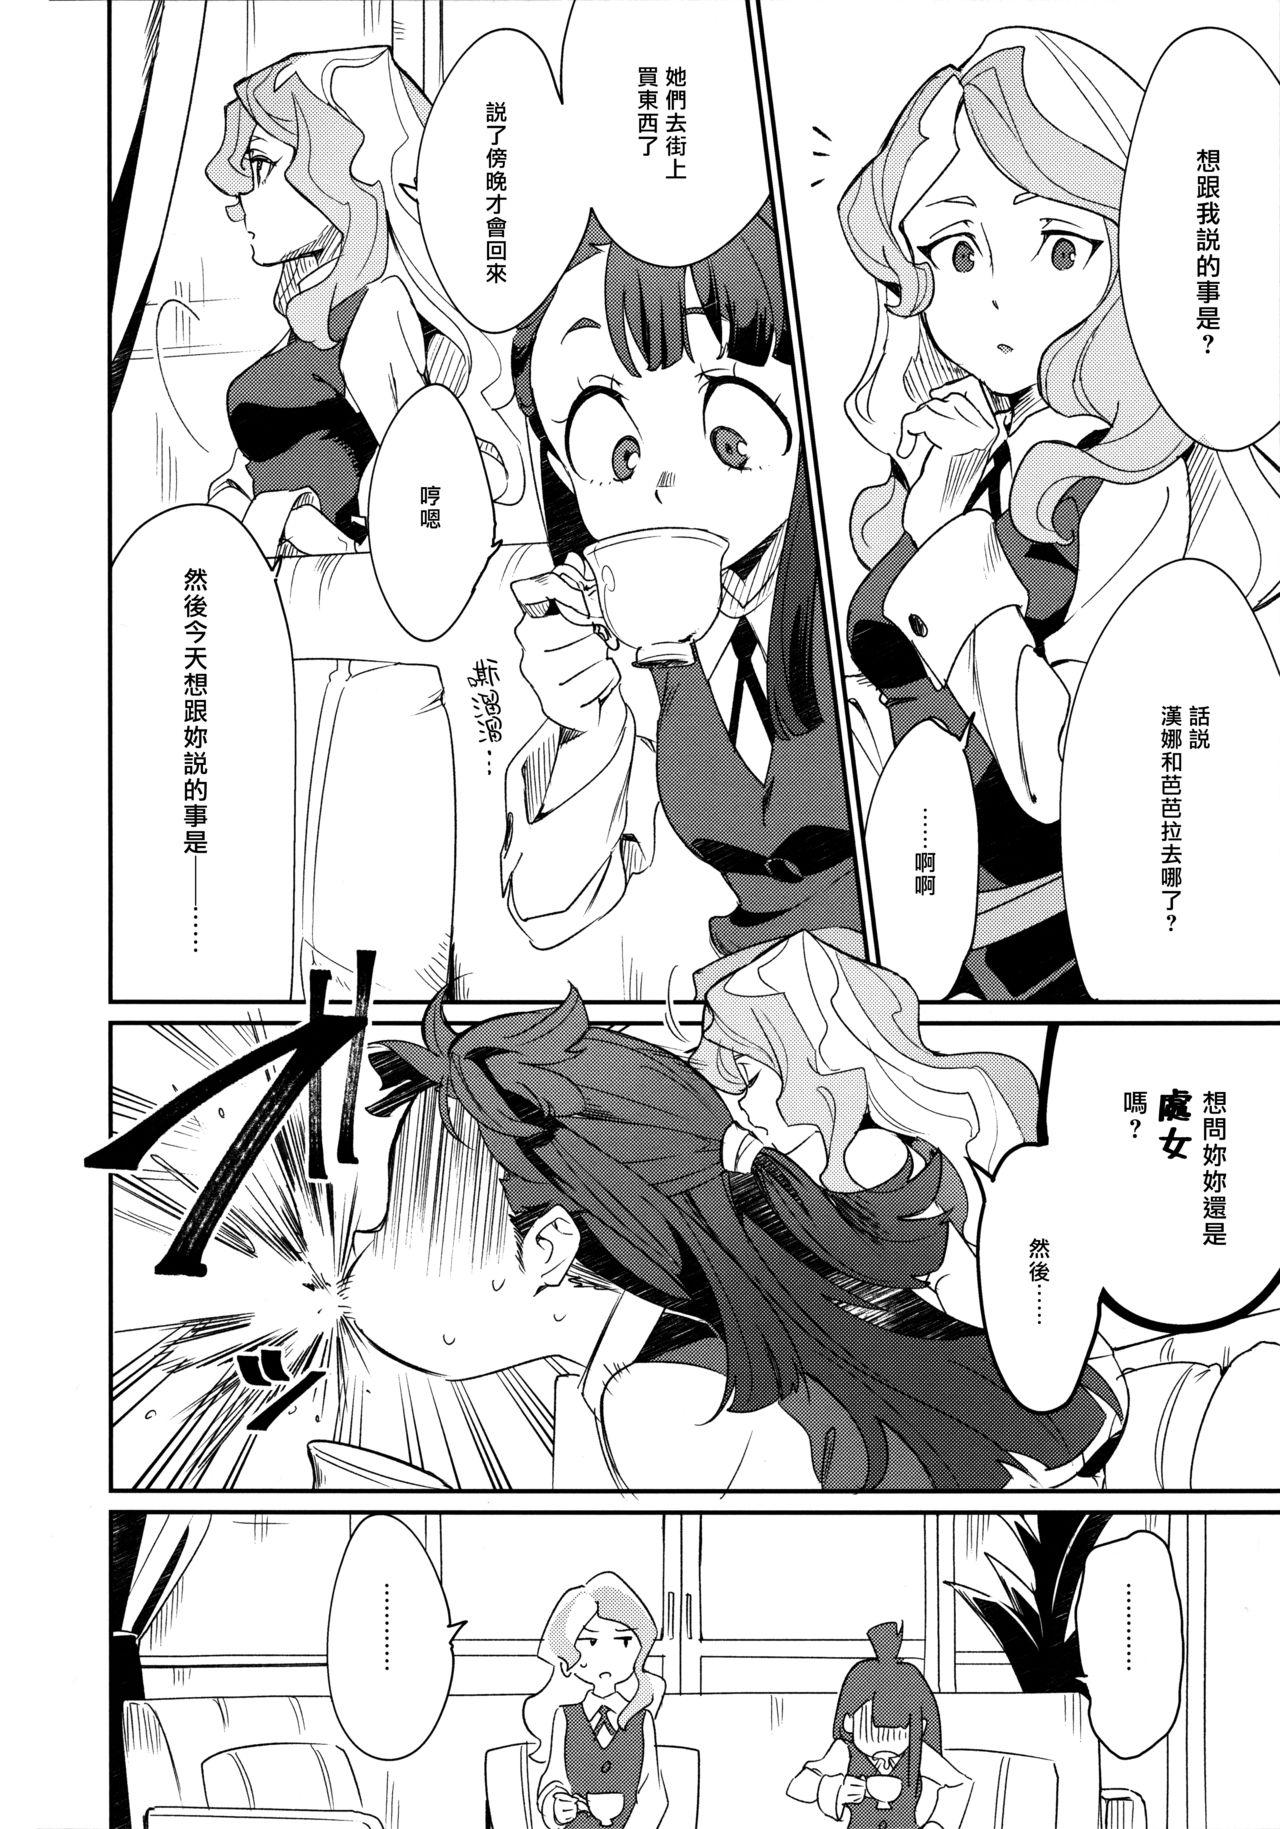 Hardcoresex xxx - Little witch academia College - Page 8